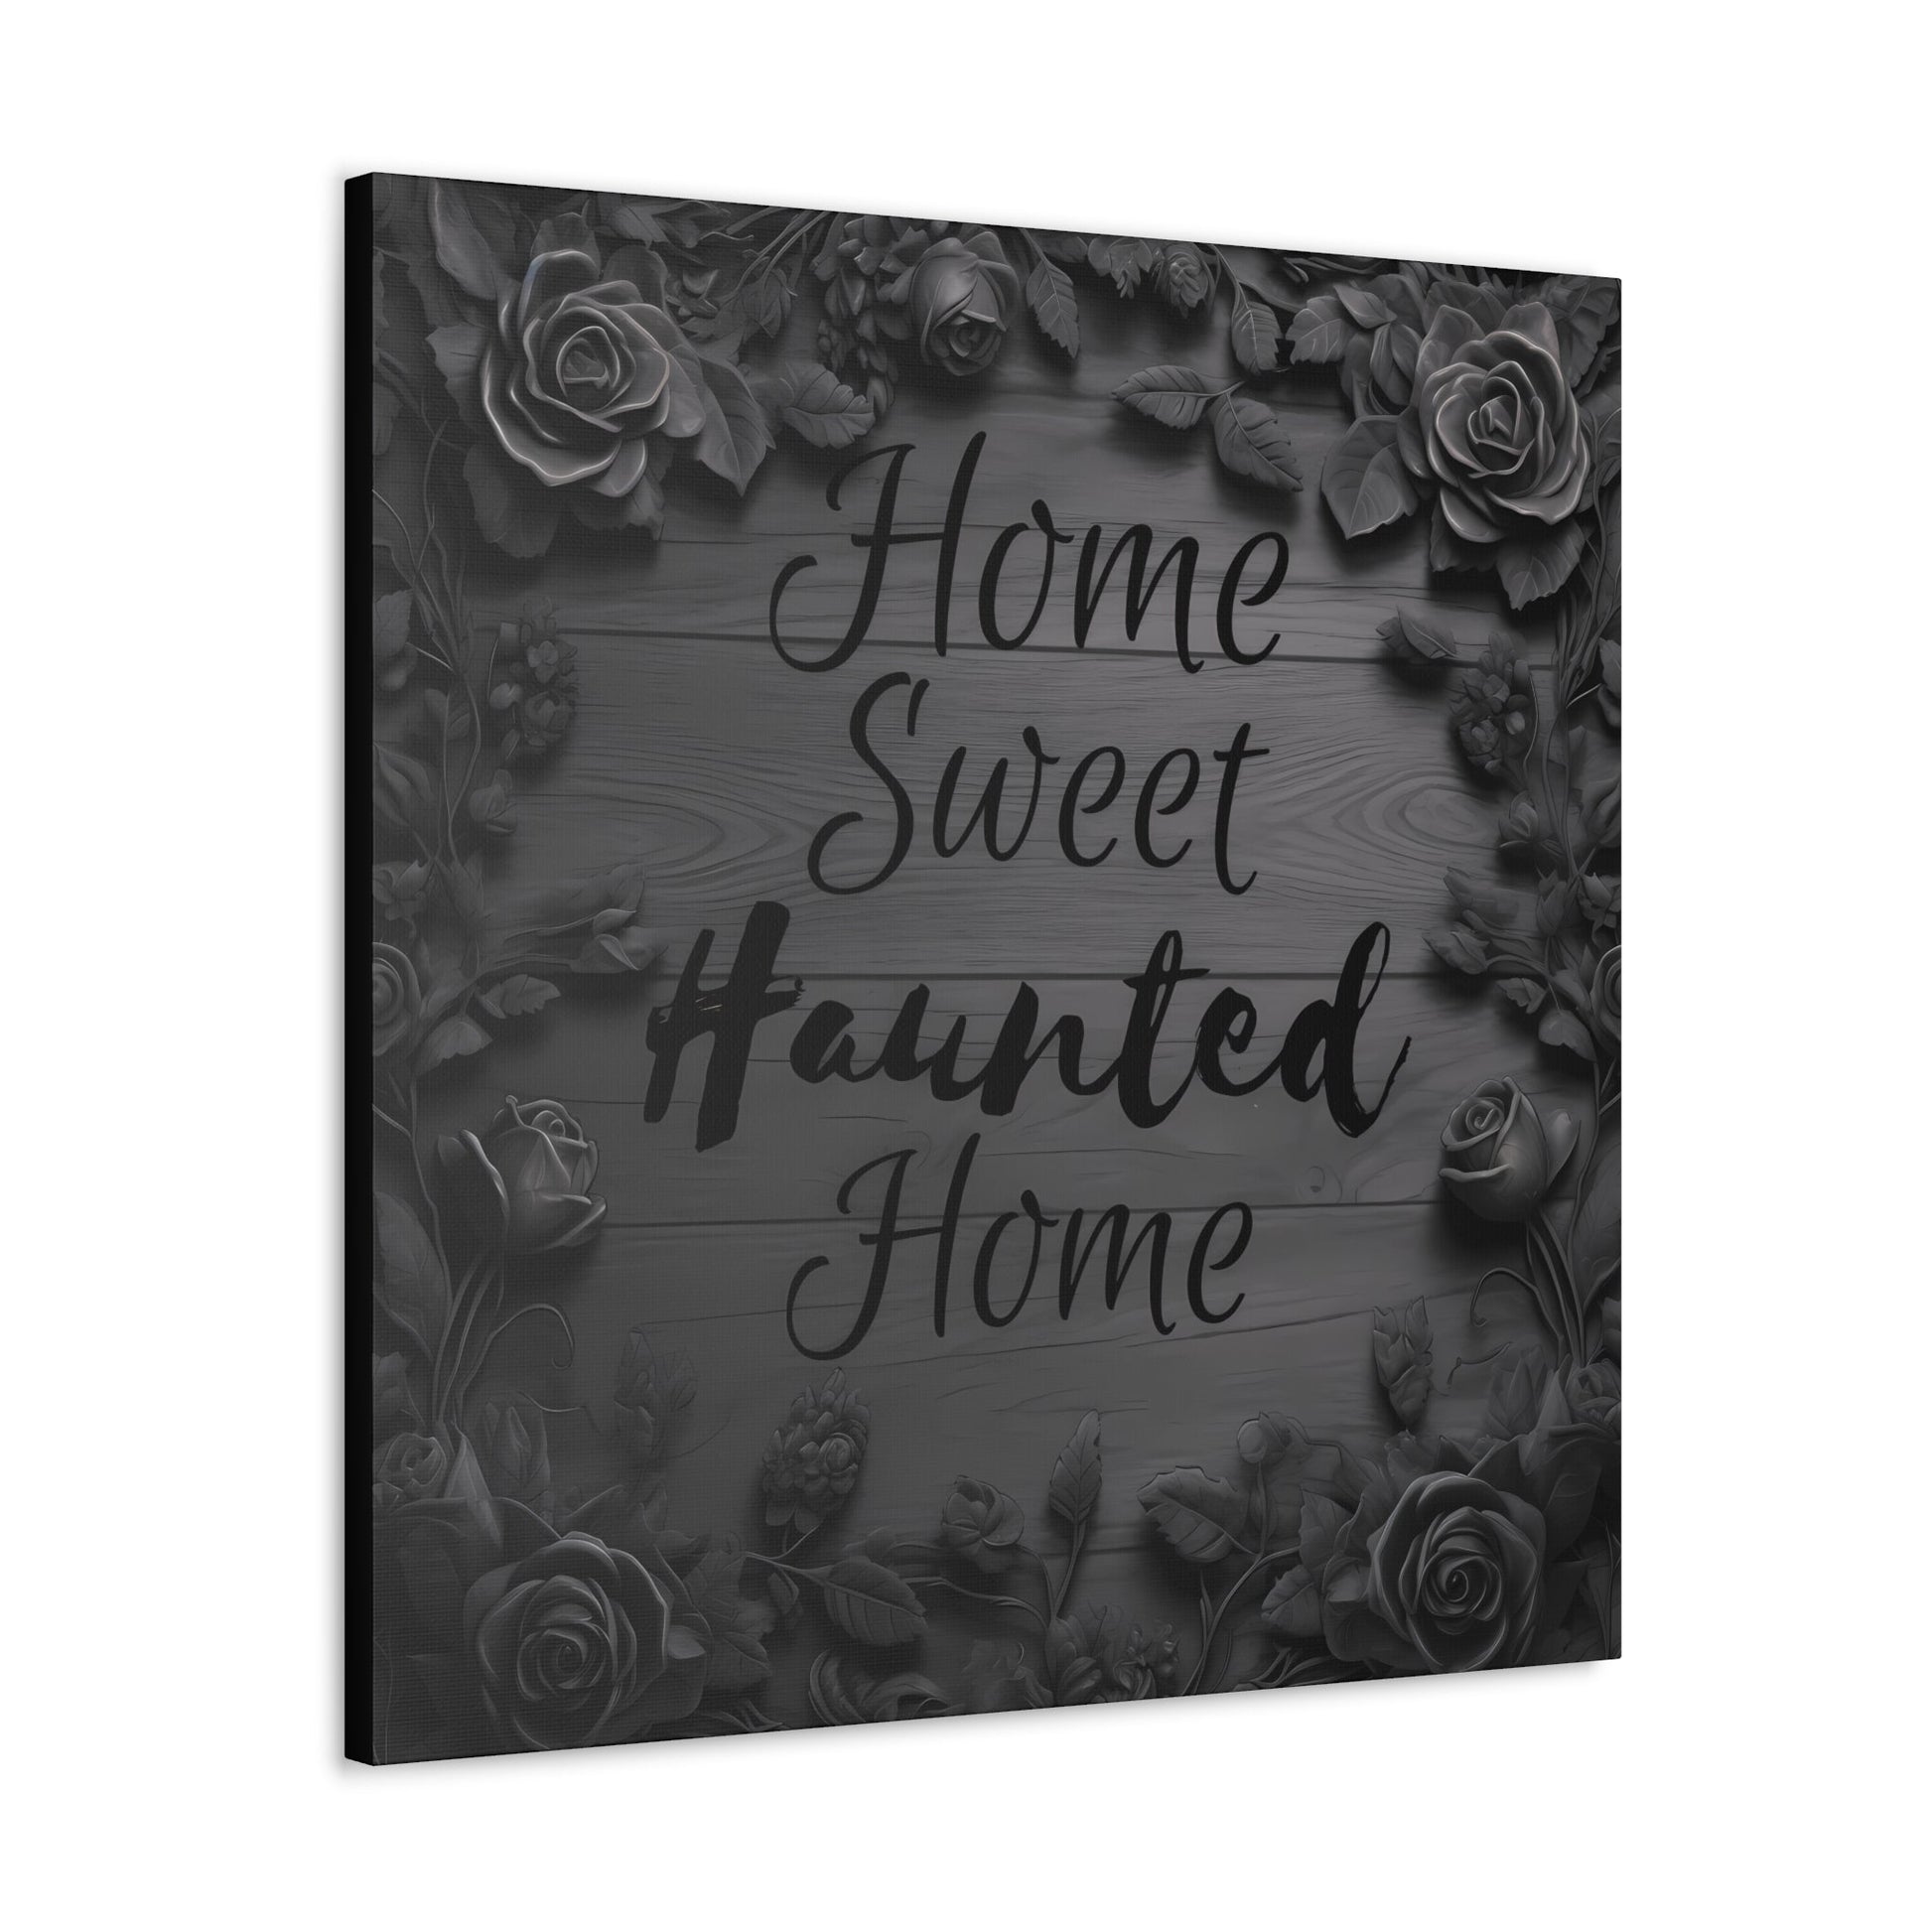 Home Sweet Haunted Home Black Gray Roses Canvas Gallery WrapCanvasVTZdesigns30″ x 30″1.25"Art & Wall DecorCanvasdead roses